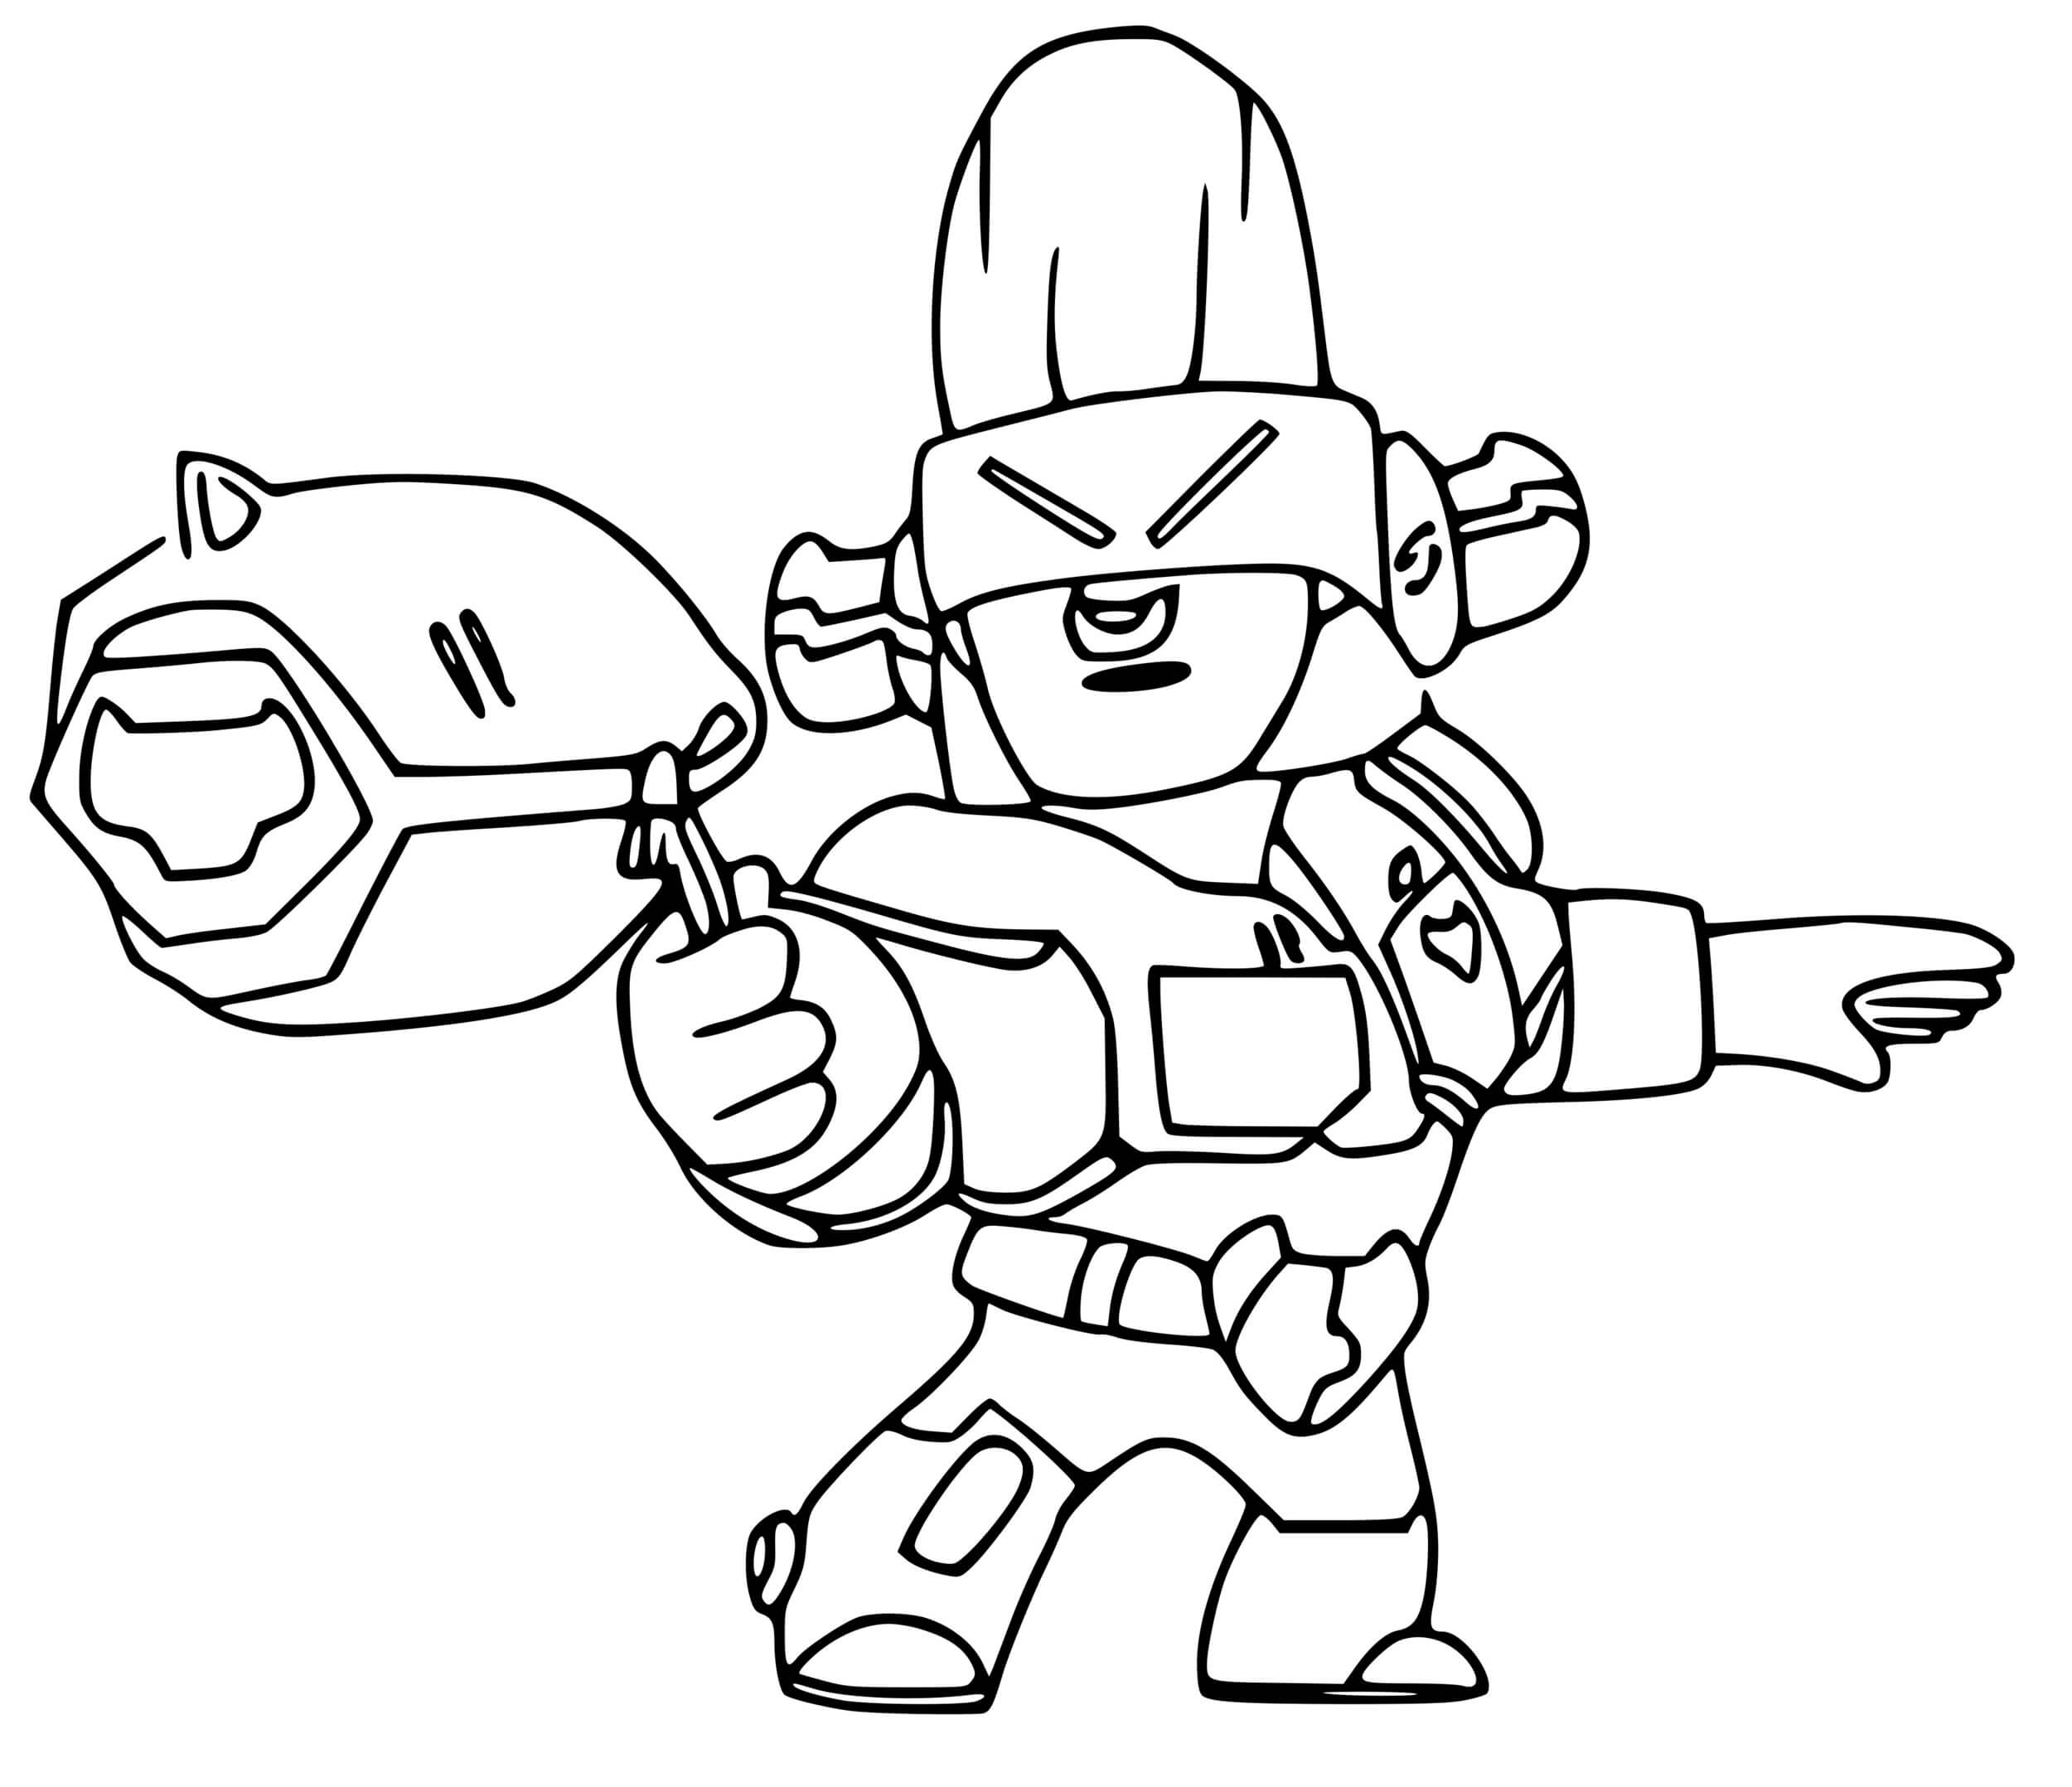 Brawl Stars Force Starr Bull De L Espace Coloring Pages - Coloring Cool